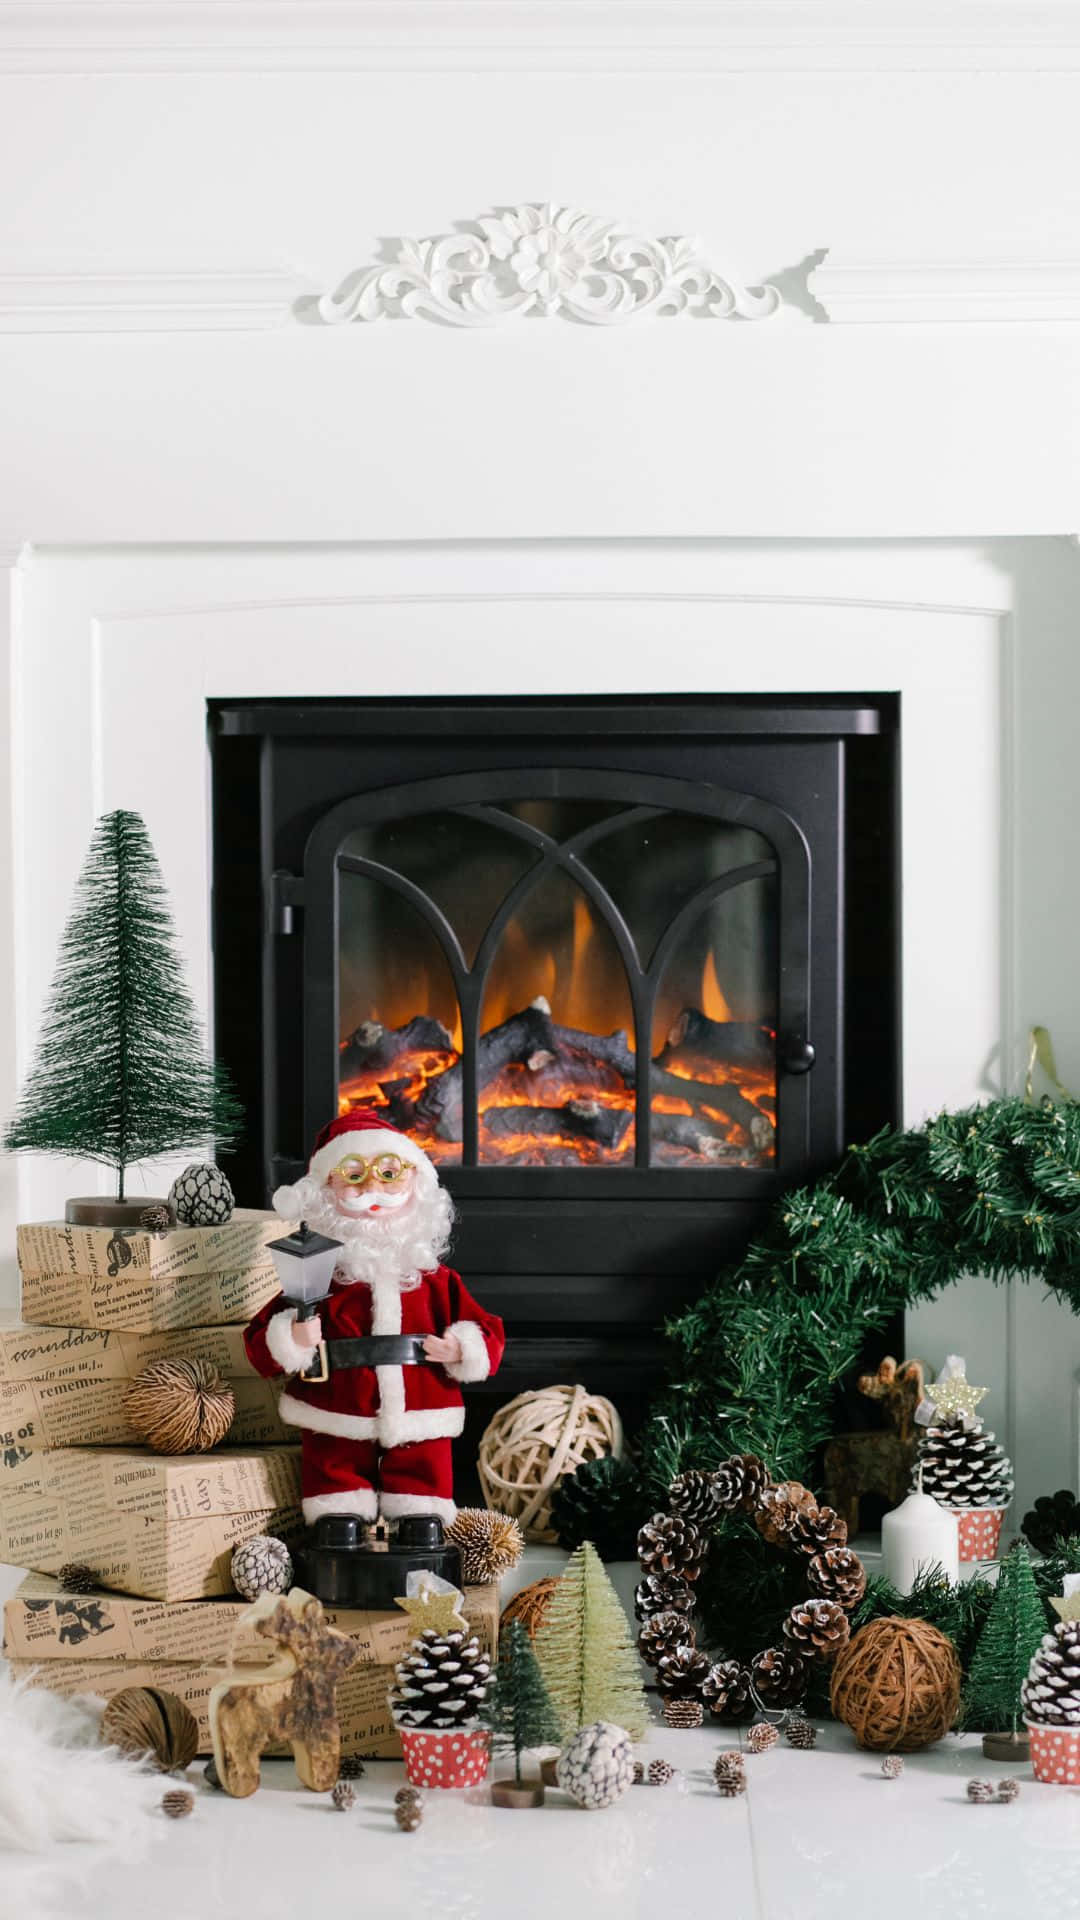 Cozy Christmas Fireplace With Decorations.jpg Wallpaper